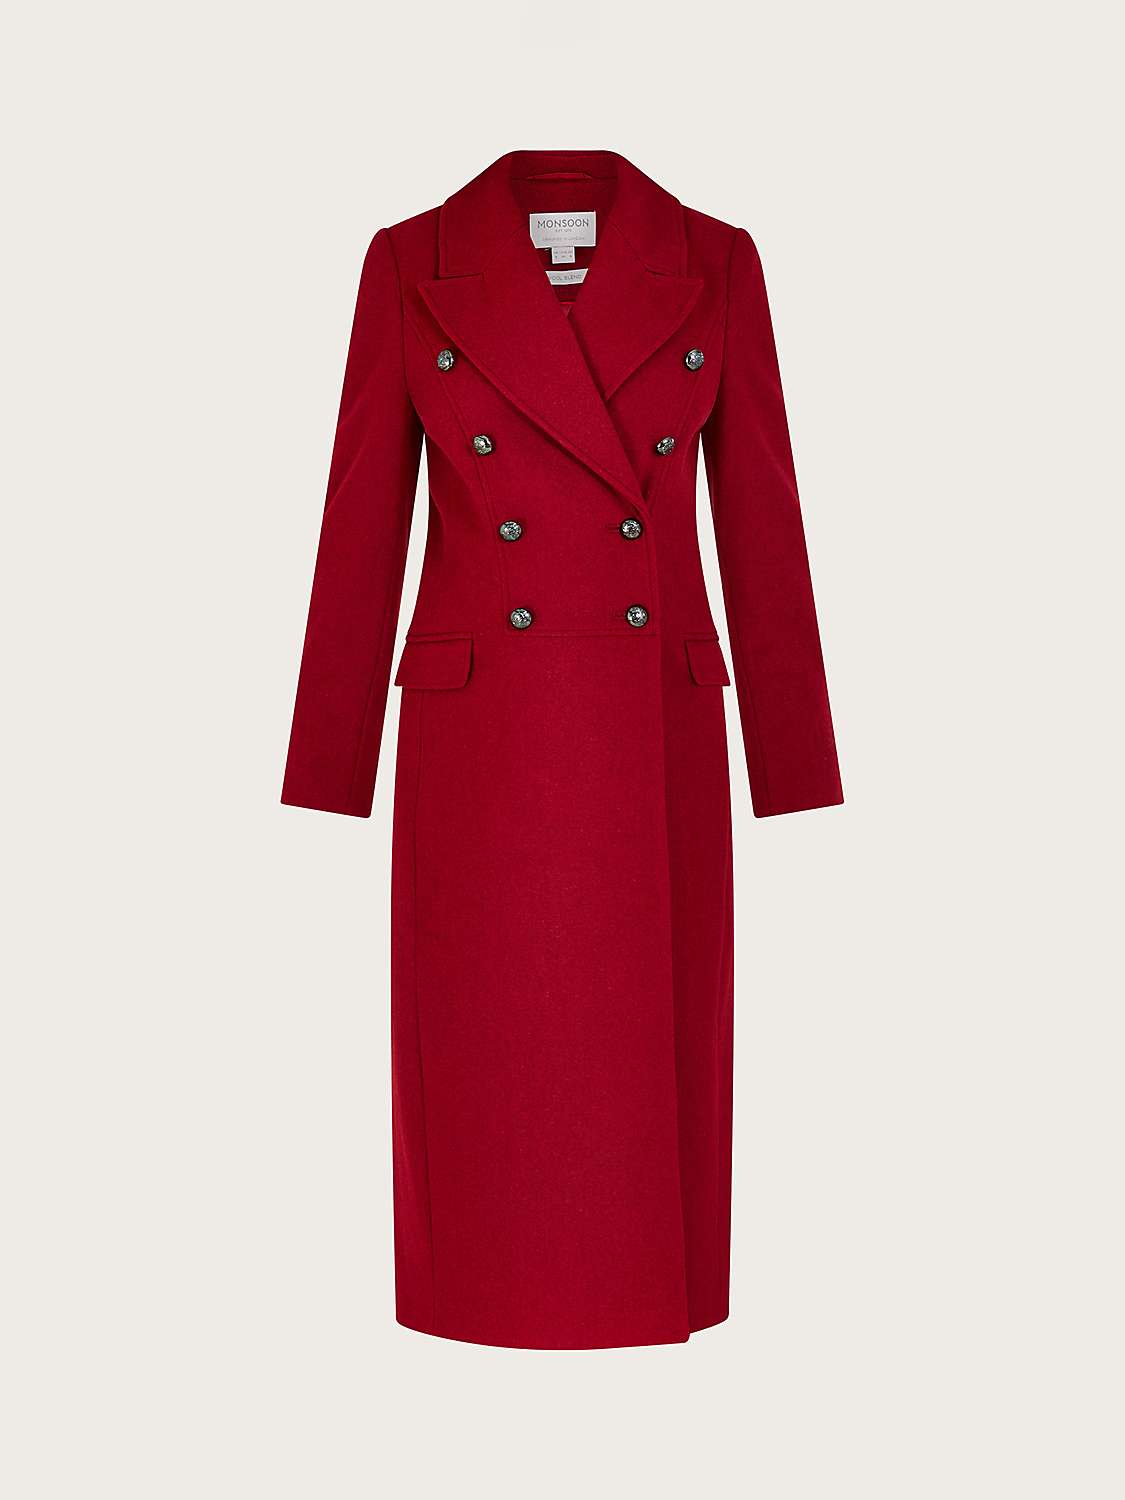 Buy Monsoon Daria Double Breasted Coat, Red Online at johnlewis.com